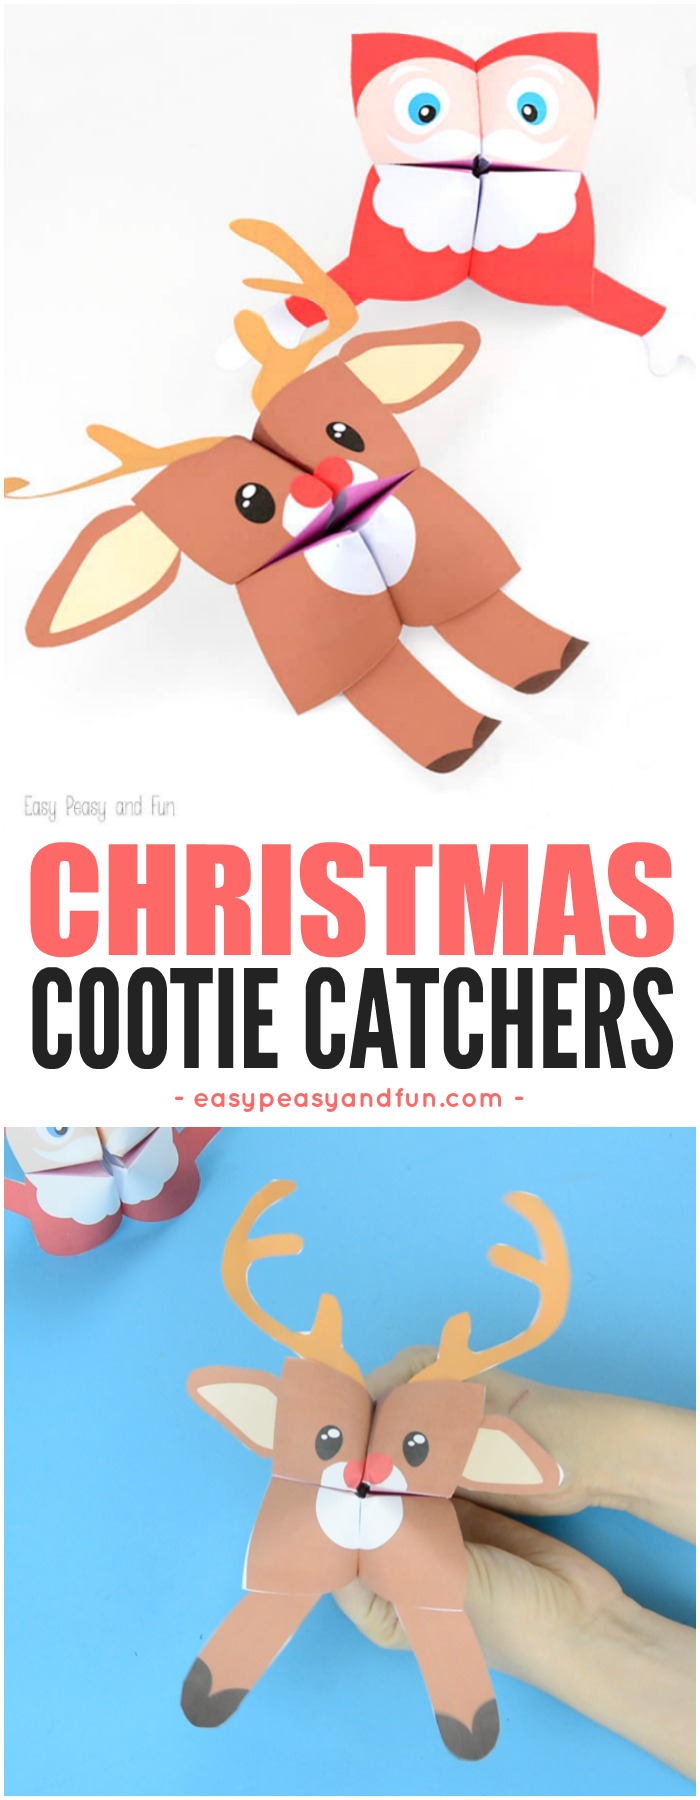 Christmas Cootie Catchers with Printable Templates Included. Super fun Christmas craft for kids to make.